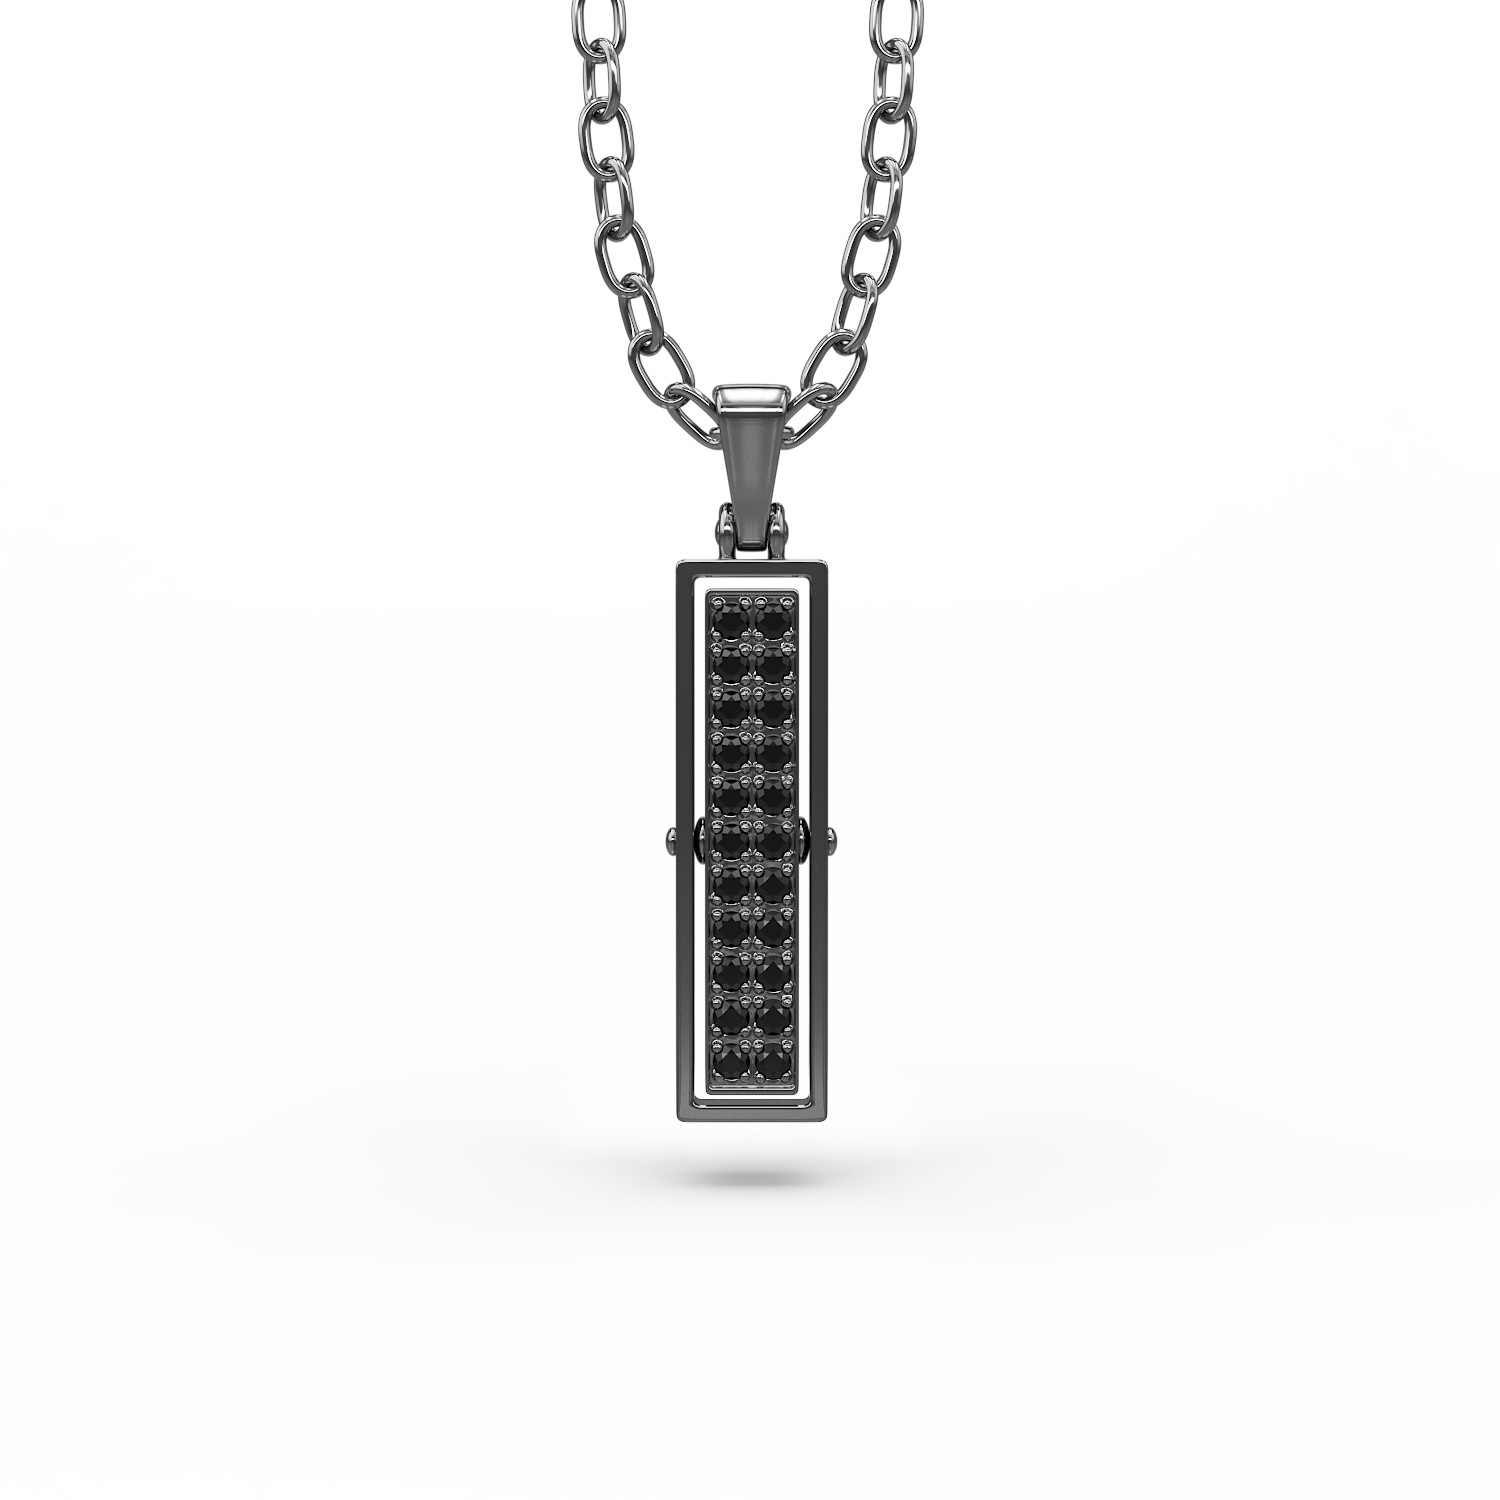 Dark Silver Towers pendant necklace